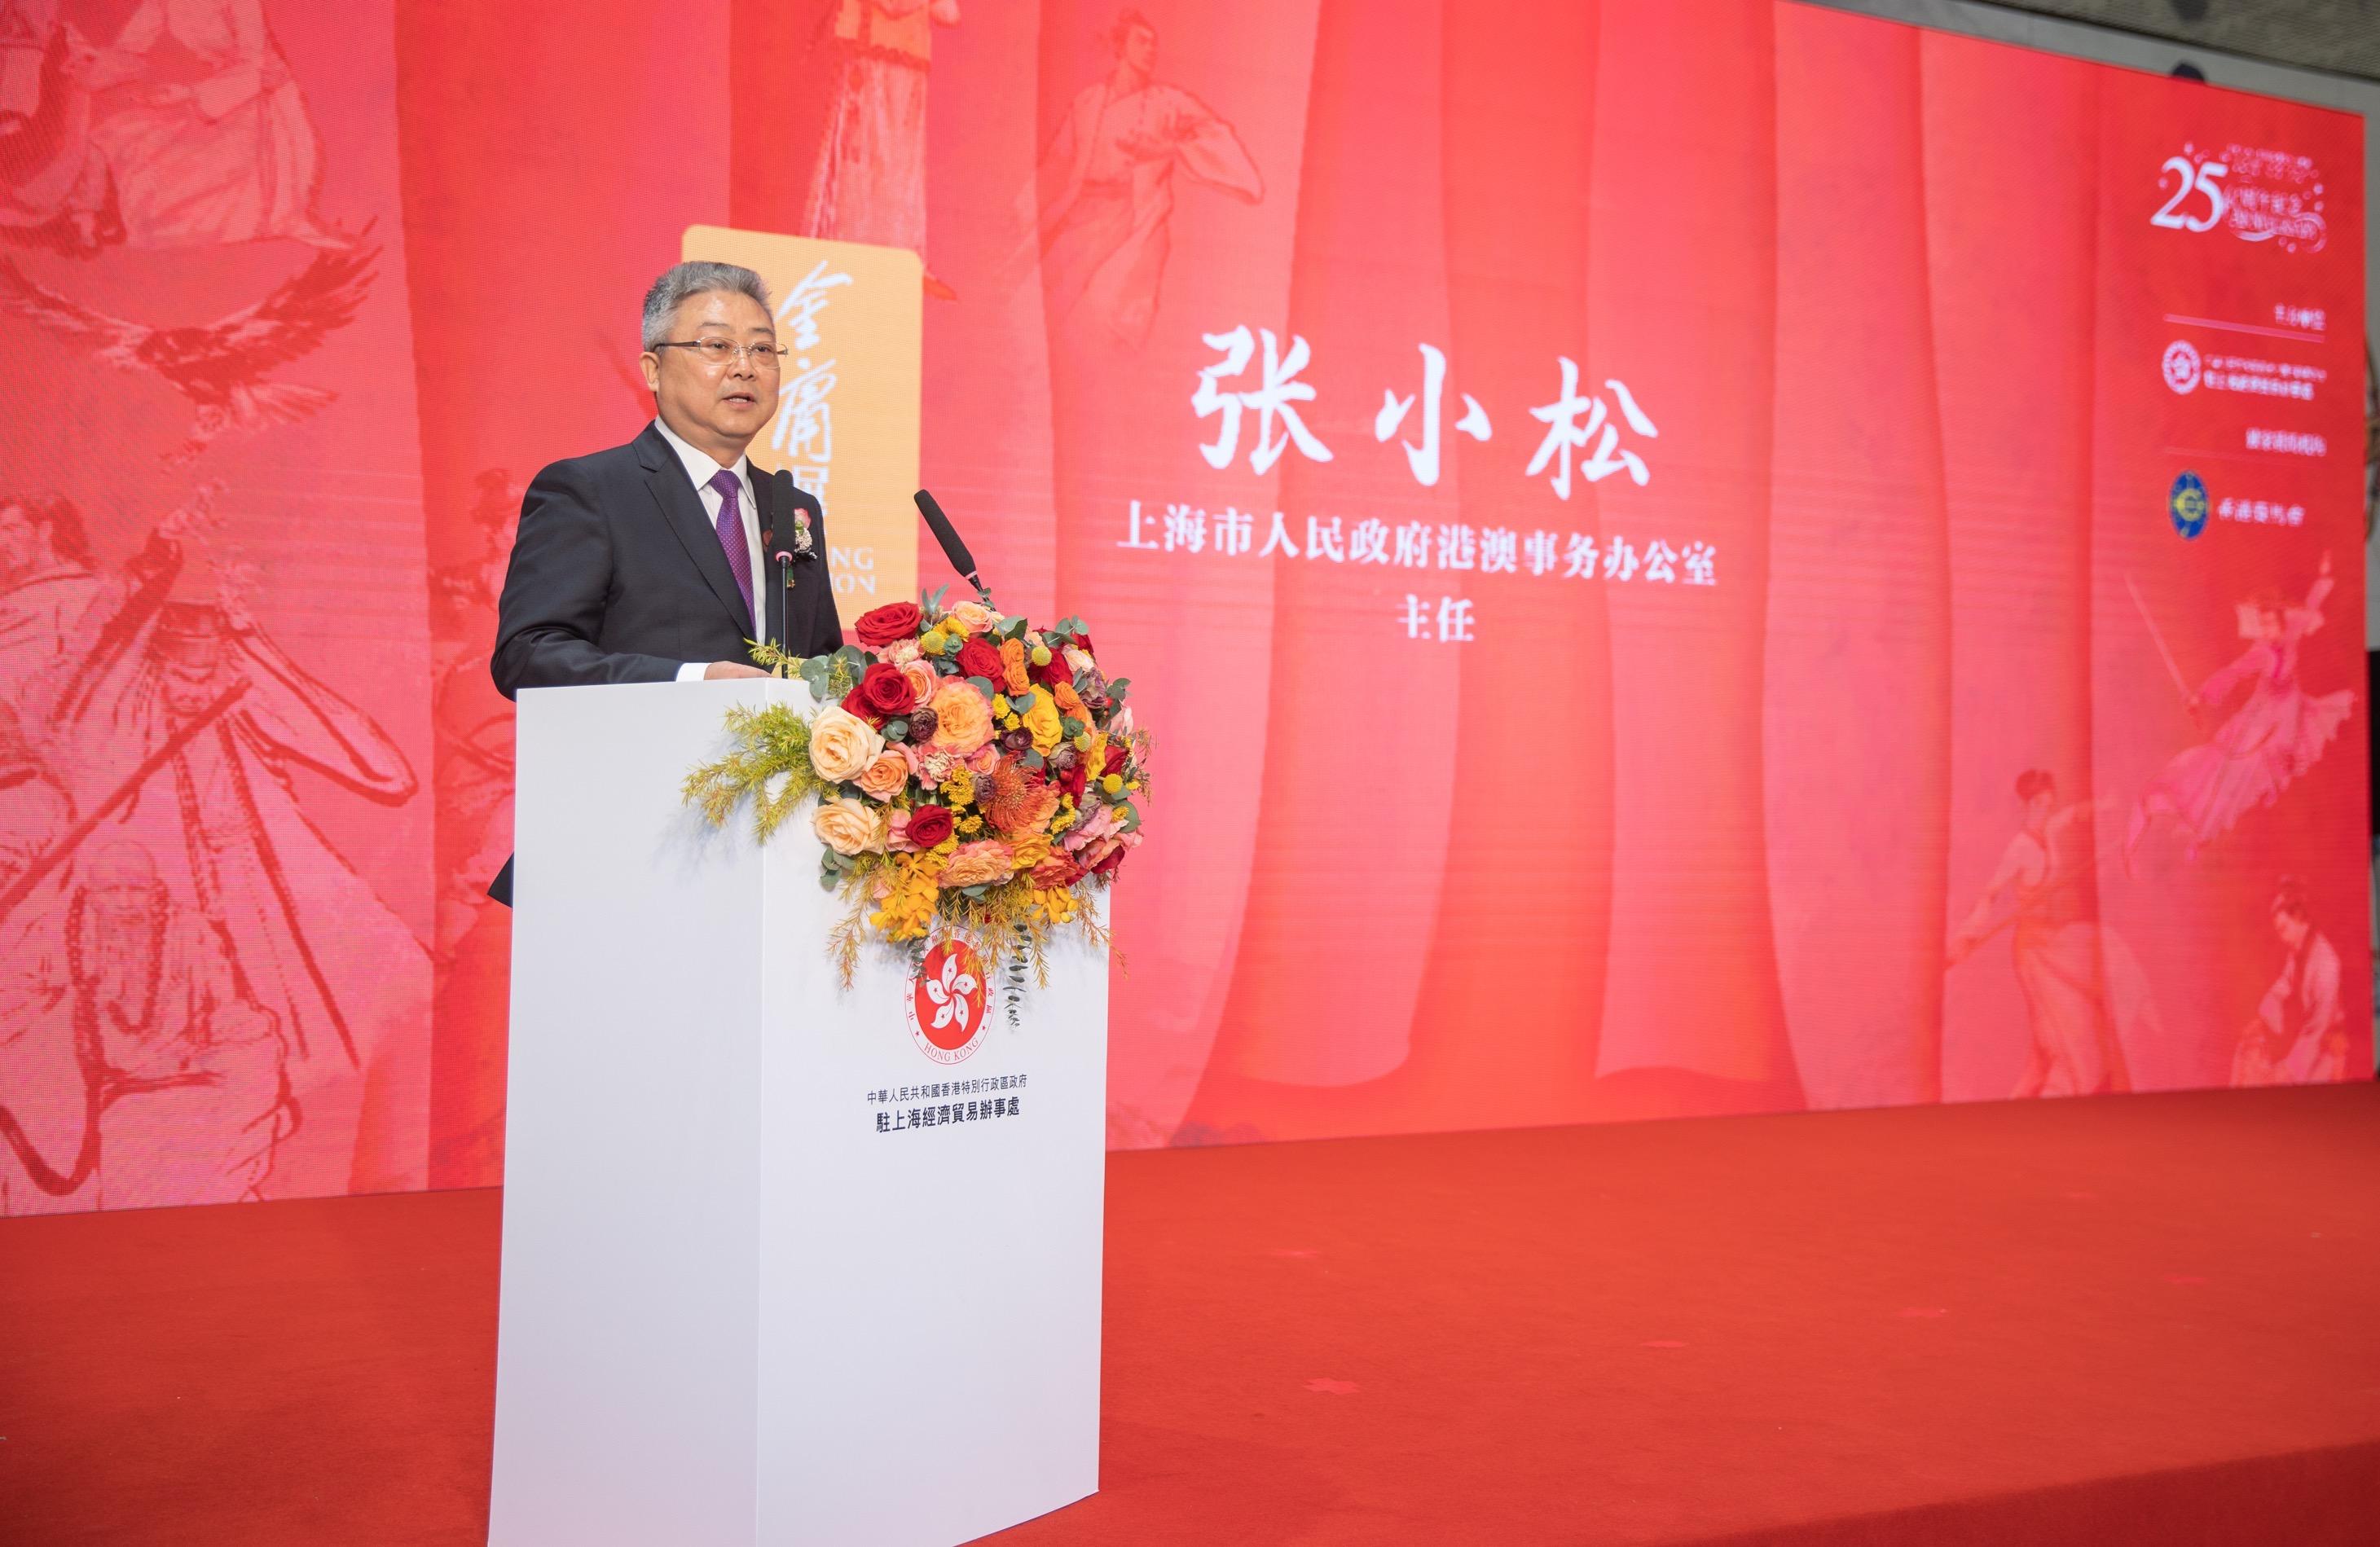 "Jin Yong Exhibition", organised by the Hong Kong Economic and Trade Office in Shanghai, was unveiled today (October 28) at Shanghai Library East in Shanghai. Photo shows the Director General of the Hong Kong and Macao Affairs Office of the Shanghai Municipal Government, Mr Zhang Xiaosong, delivering a speech at the opening ceremony.